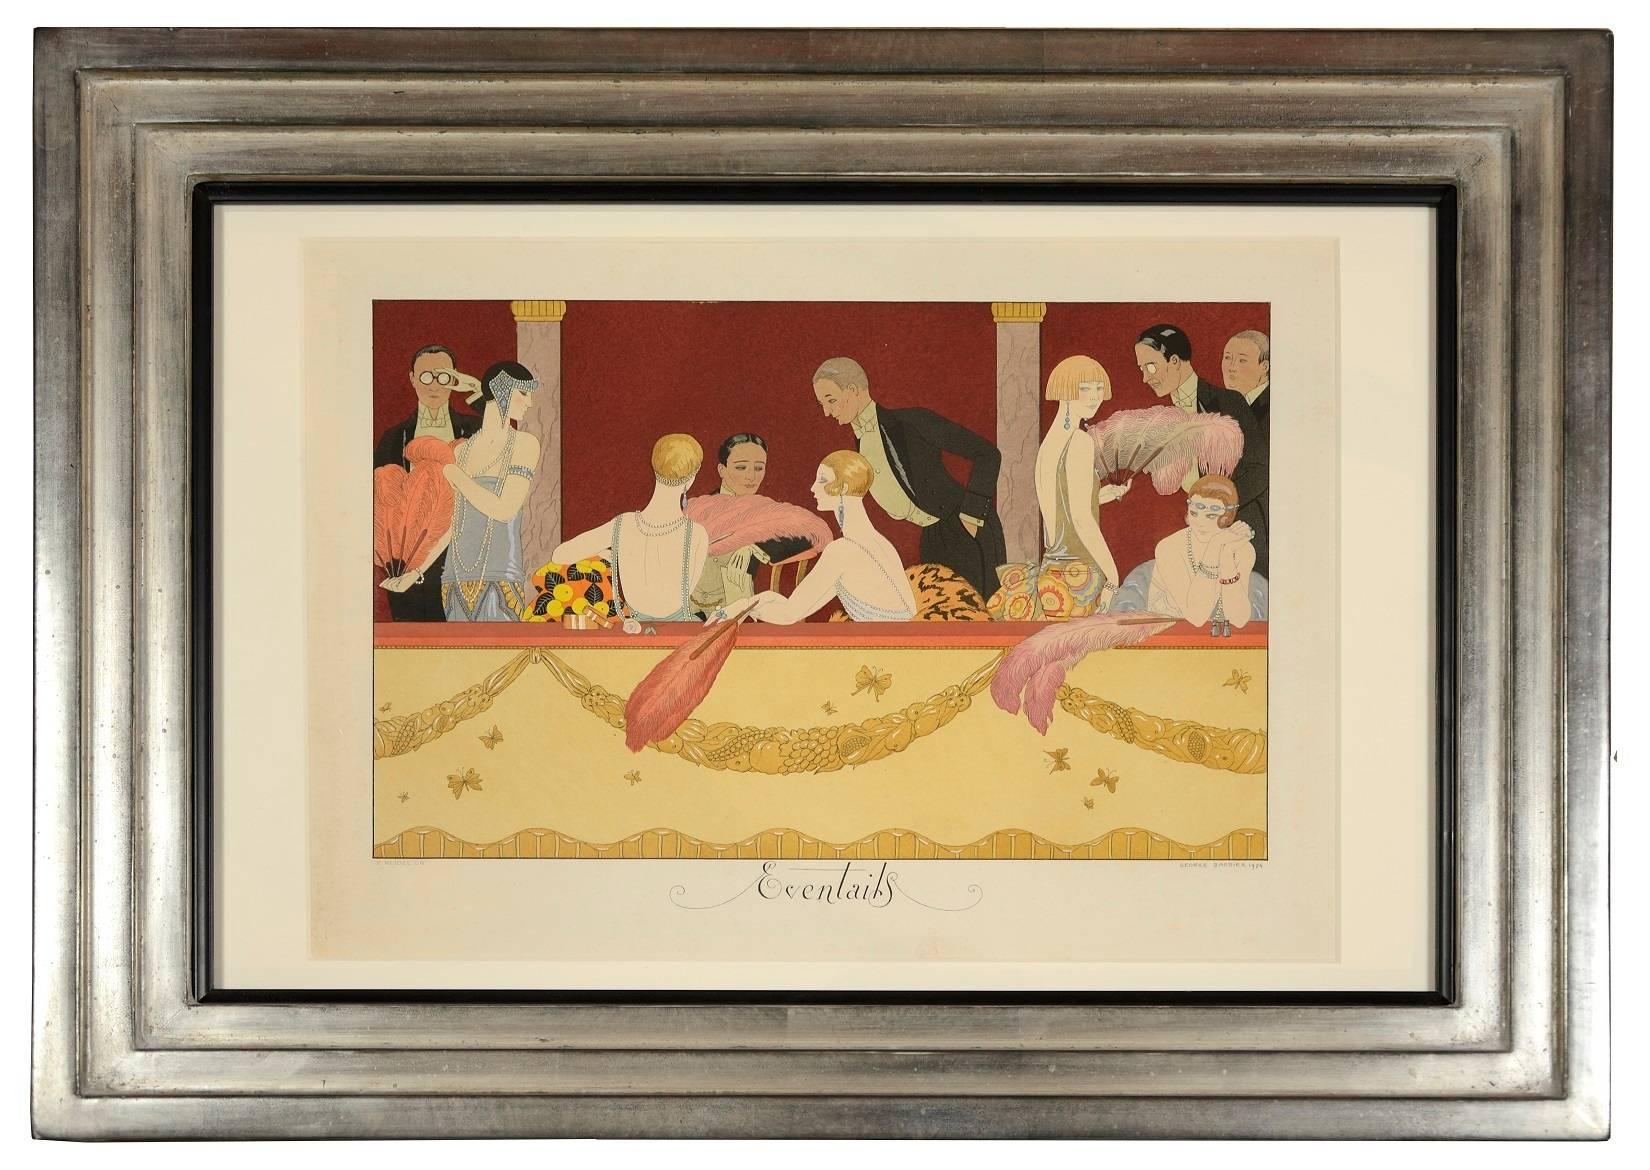 Lithograph, hand-coloured in pochoir by Henri Reidel after Barbier with fully coloured background. Framed and glazed.

George Barbier, one of the great French illustrators of the early twentieth century, also designed jewelry, glass and wallpaper,